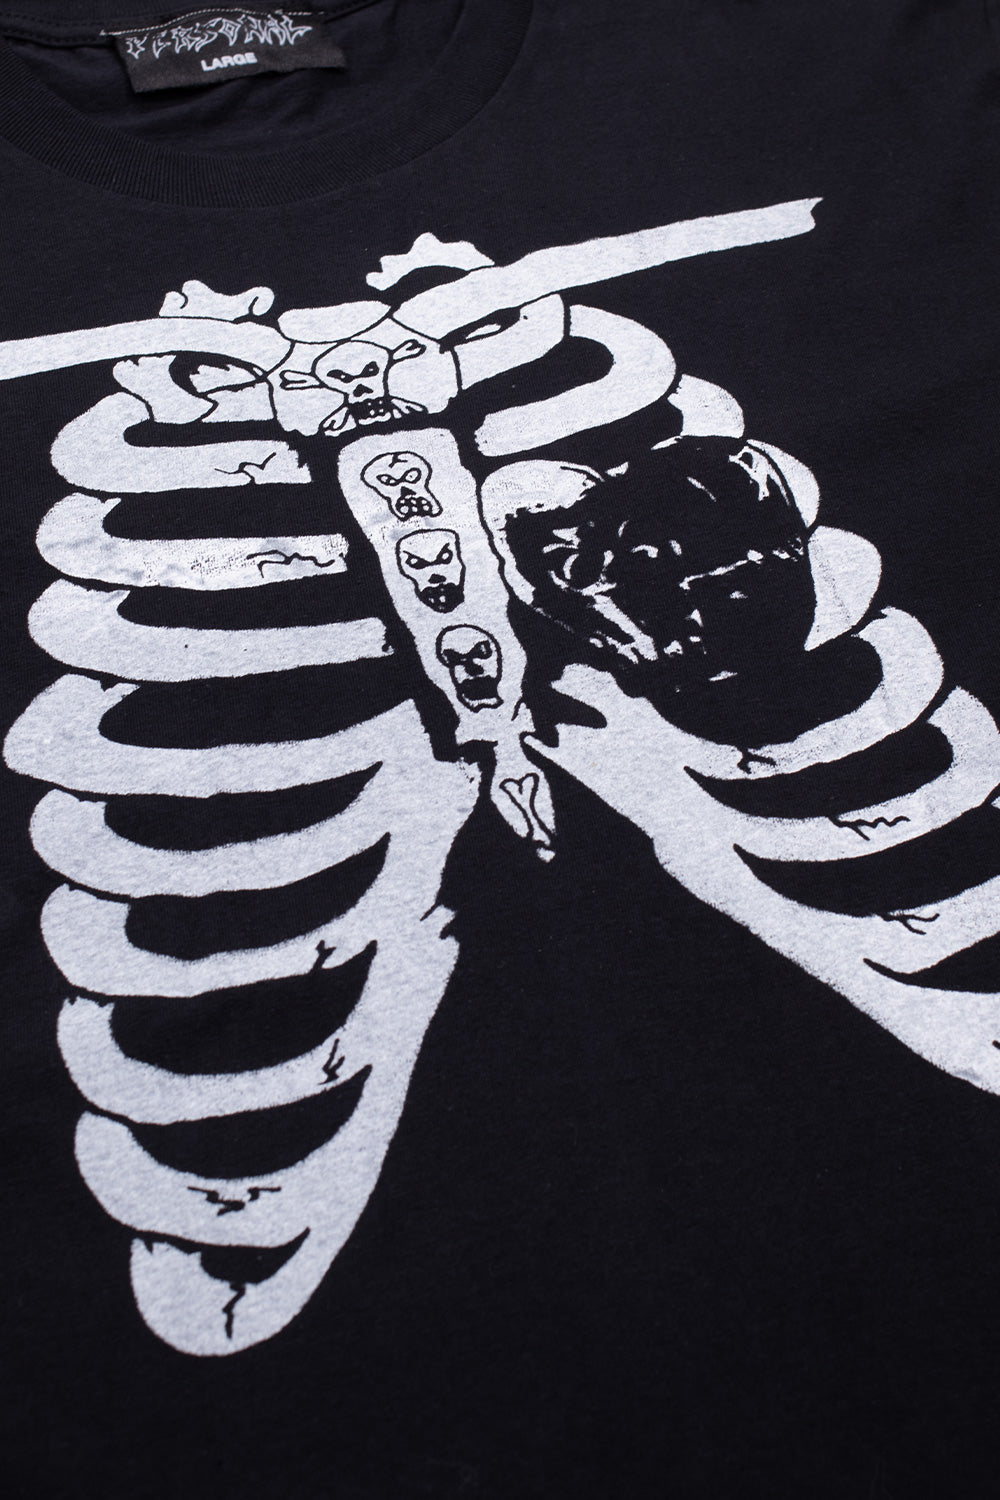 Personal Joint Rib Cage T-Shirt Black - BONKERS